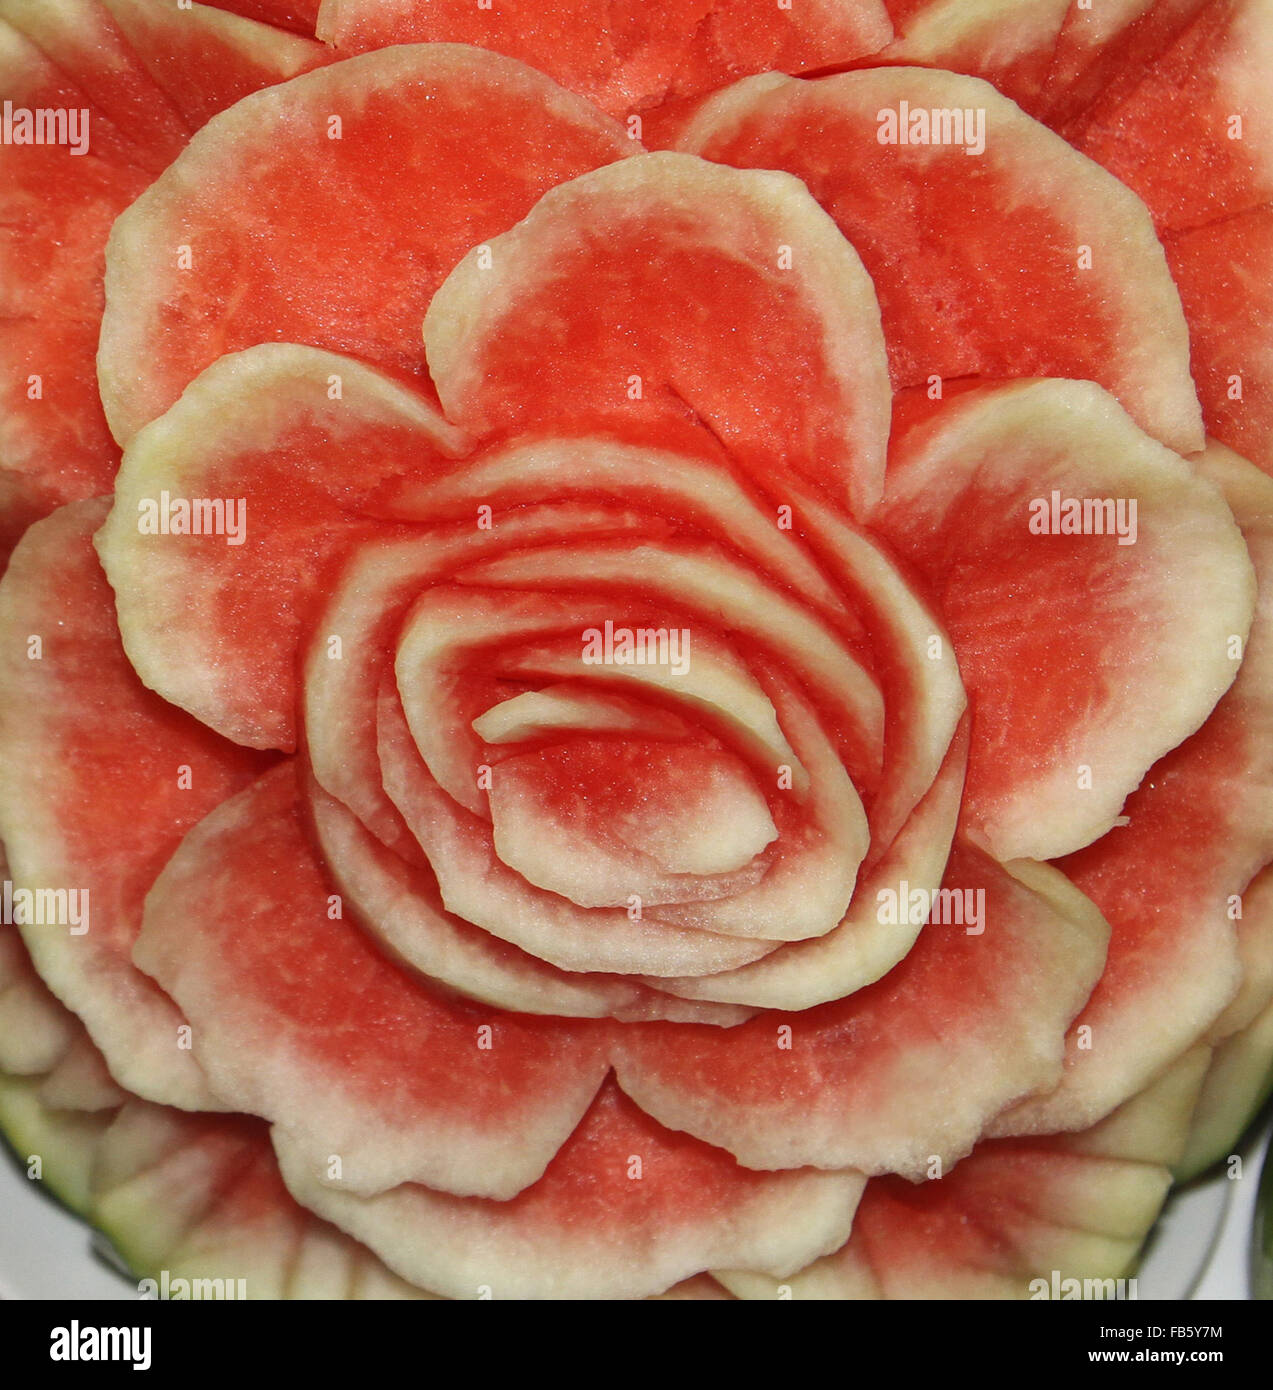 Watermelon sliced in the shape of a flower Stock Photo